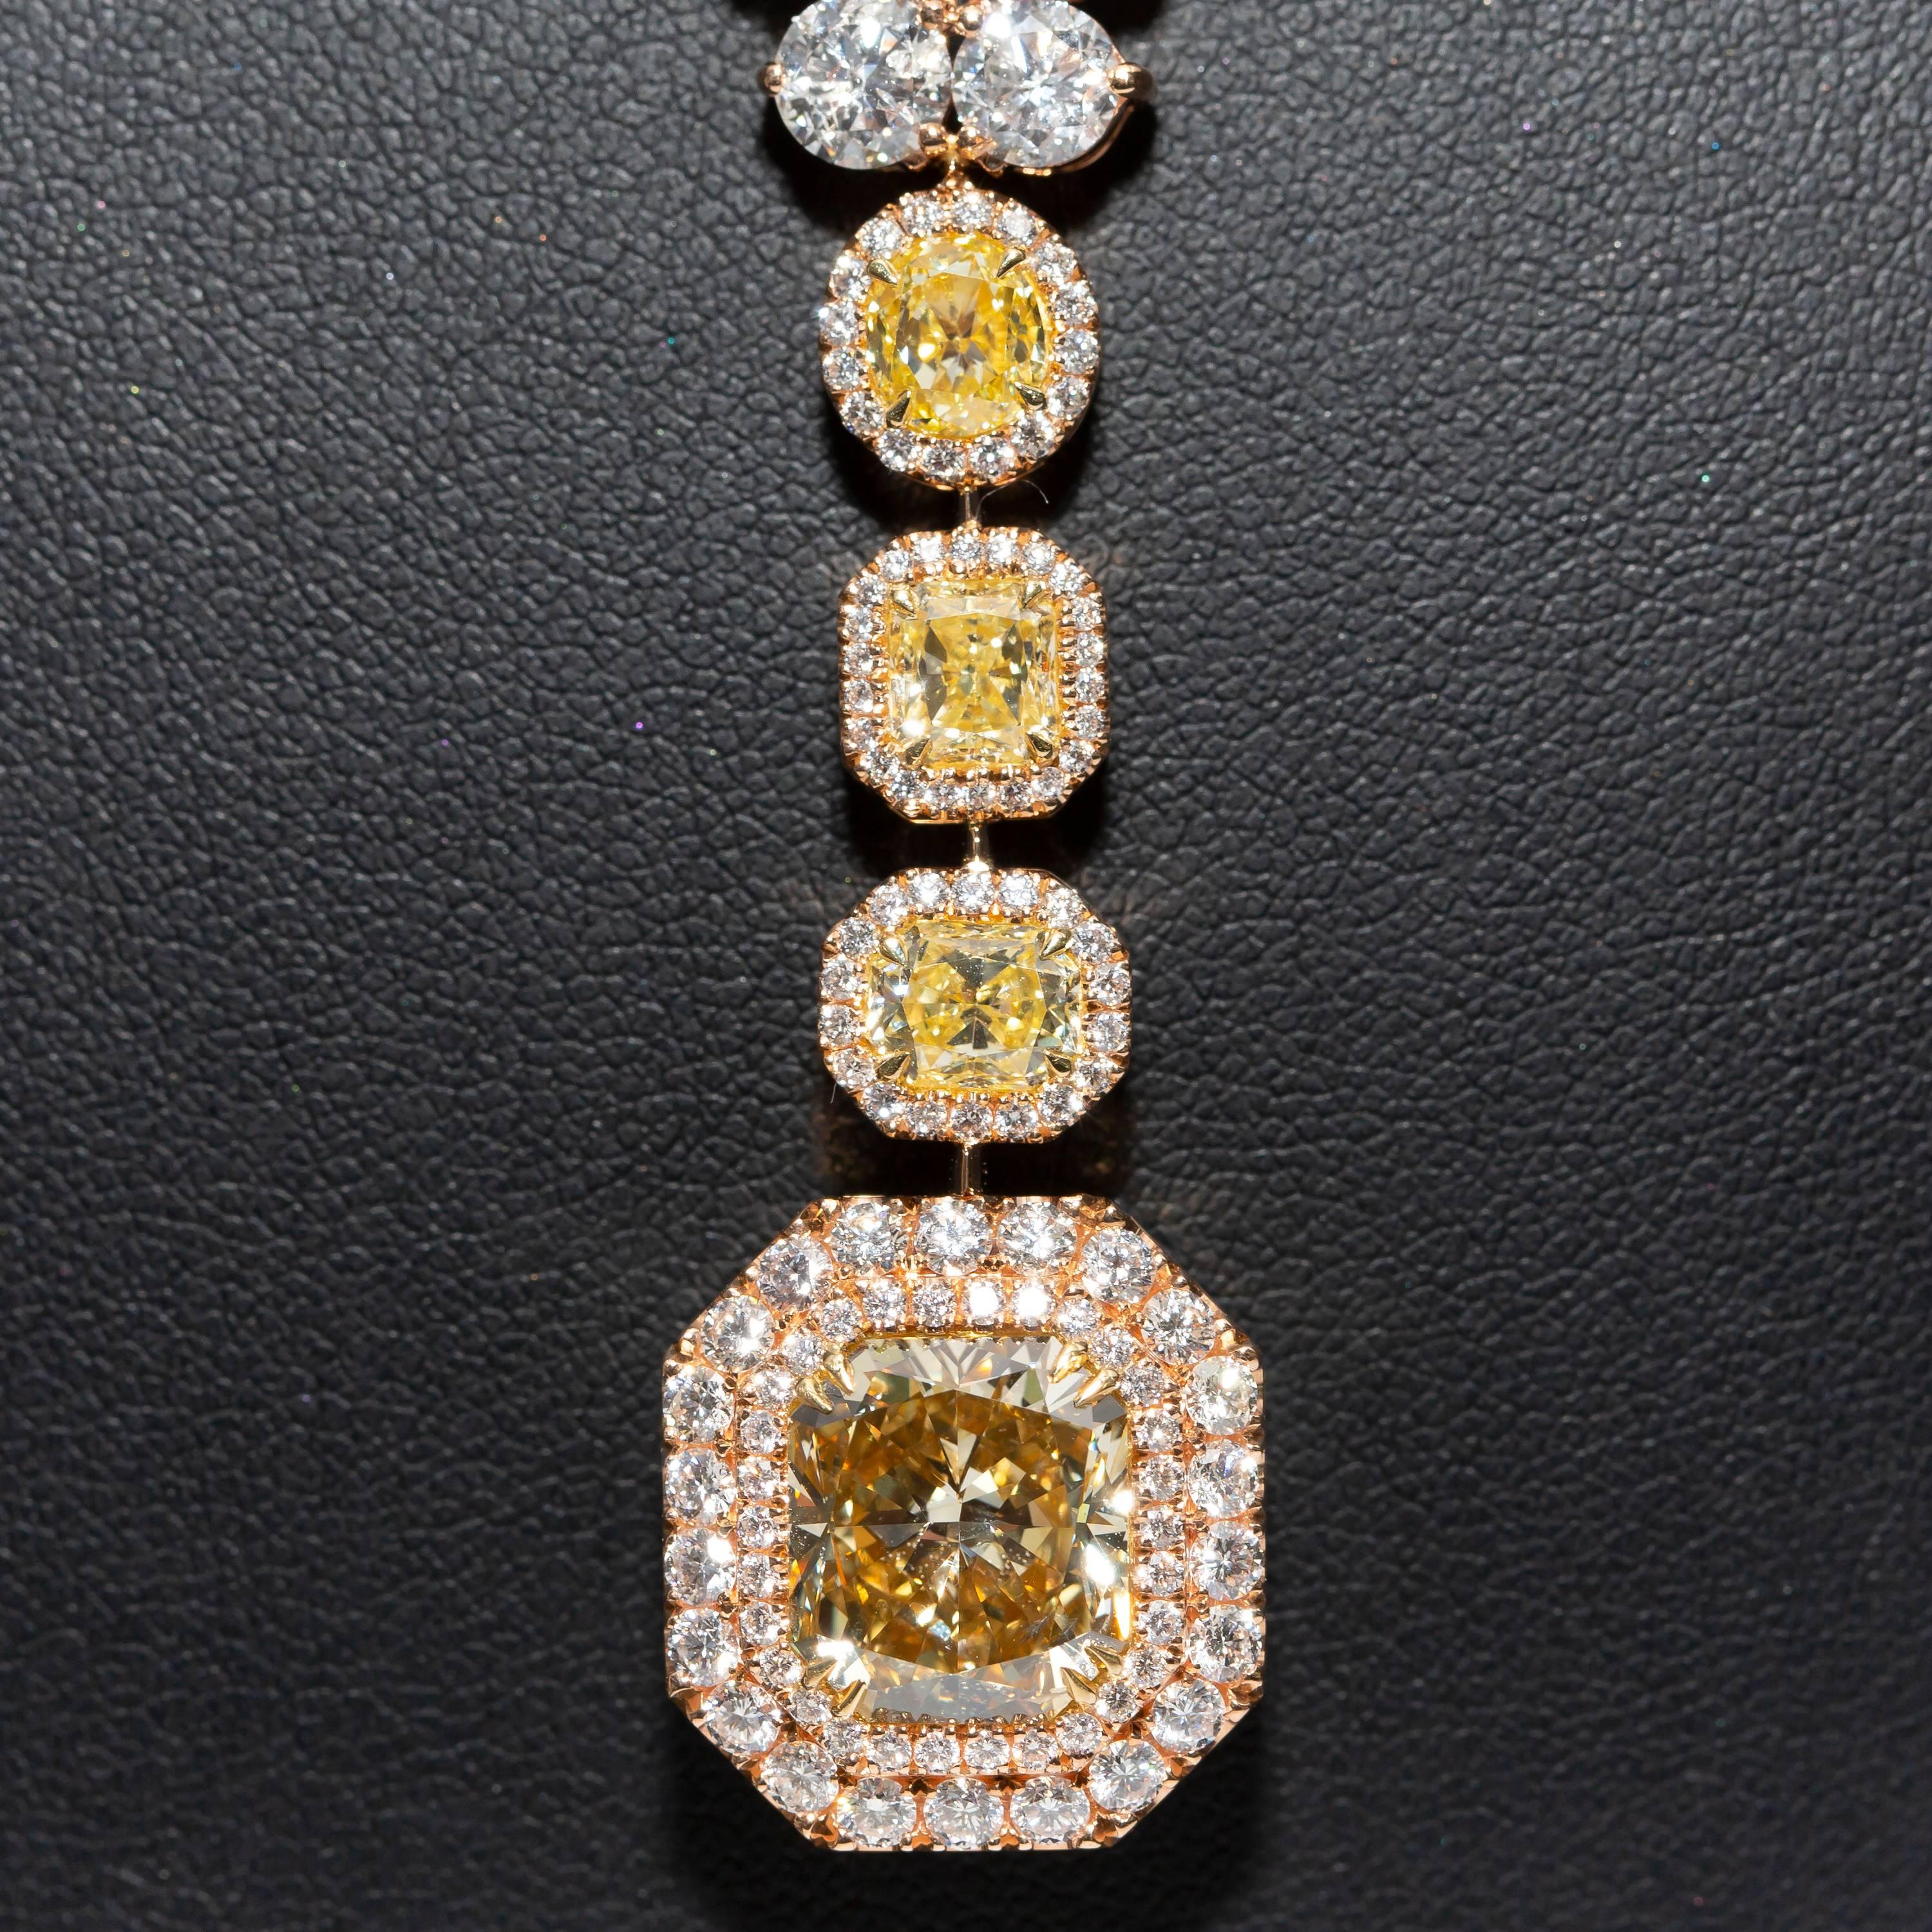 GIA certified center stone 6.06 Carats Fancy Deep Brownish Yellow, clarity SI2 surrounded by double Halo of White Diamonds, complimented with three mixed shapes Yellow Diamonds (Y-Z VS2) Round, Radiant and Cushion cut. The total weight of the three